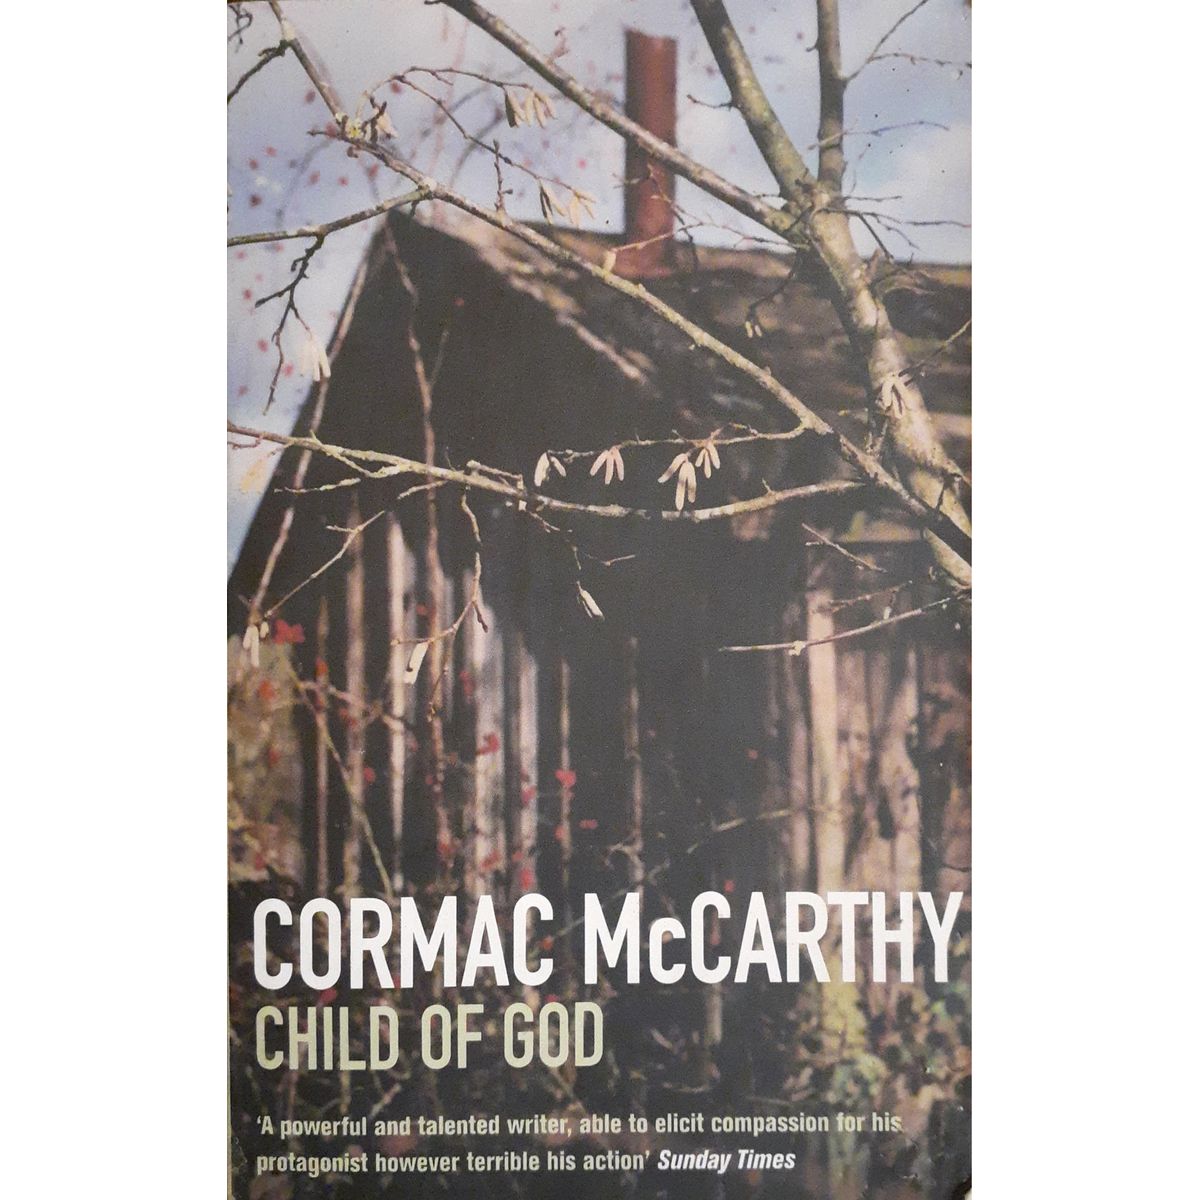 ISBN: 9780330306430 / 033030643X - Child of God by Cormac McCarthy [1989]